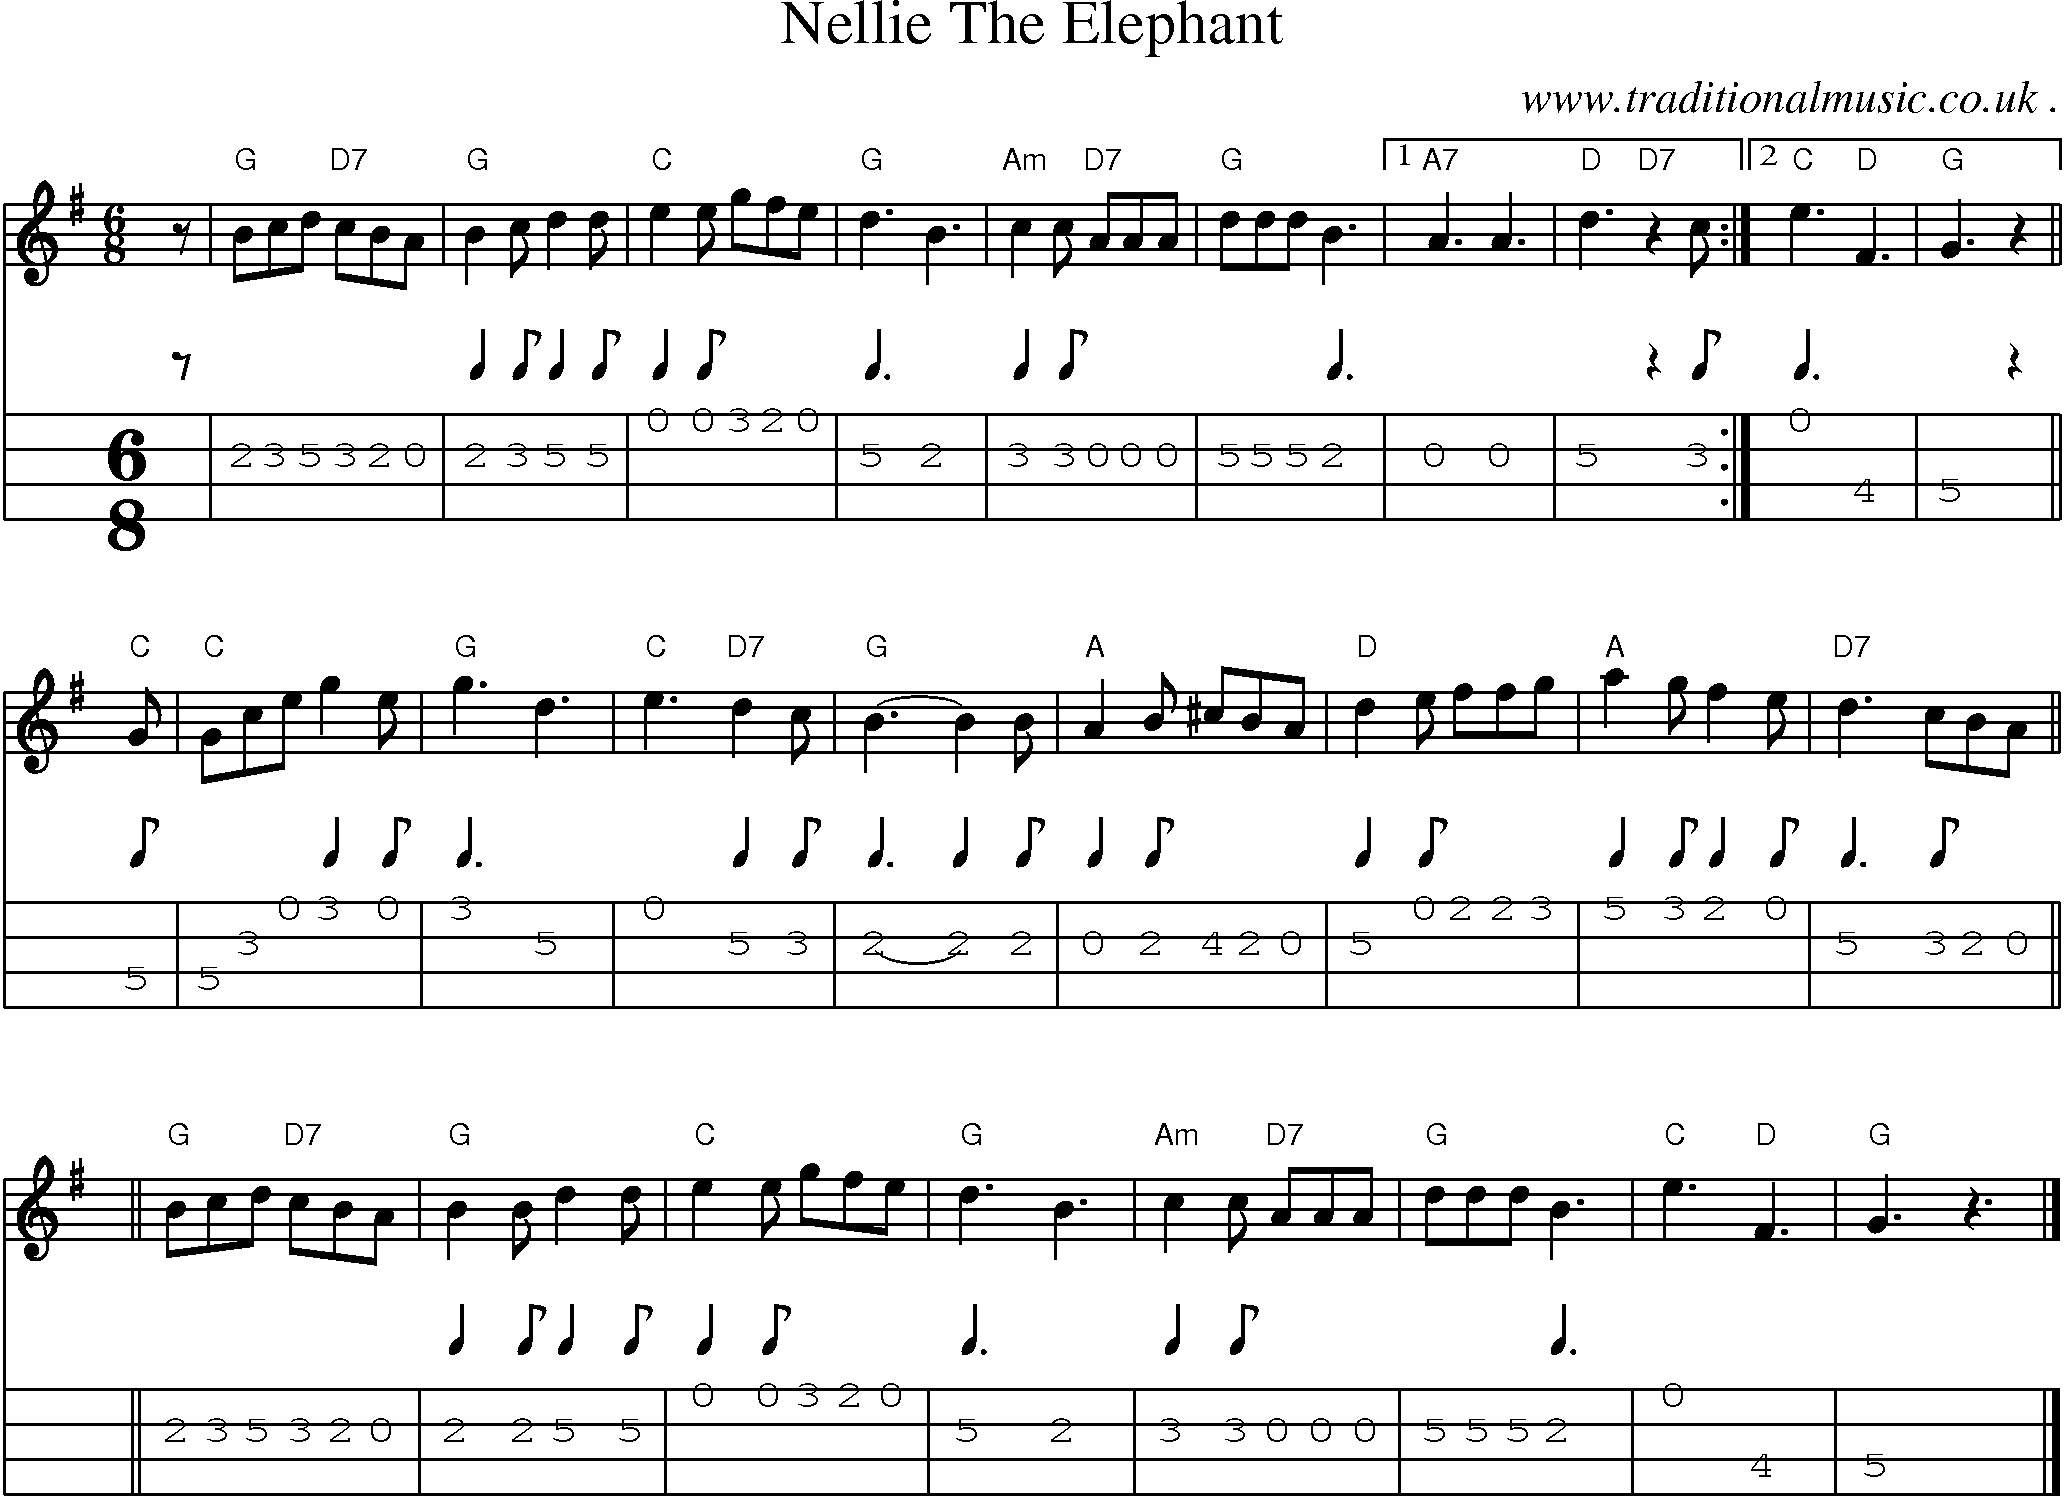 Sheet-music  score, Chords and Mandolin Tabs for Nellie The Elephant